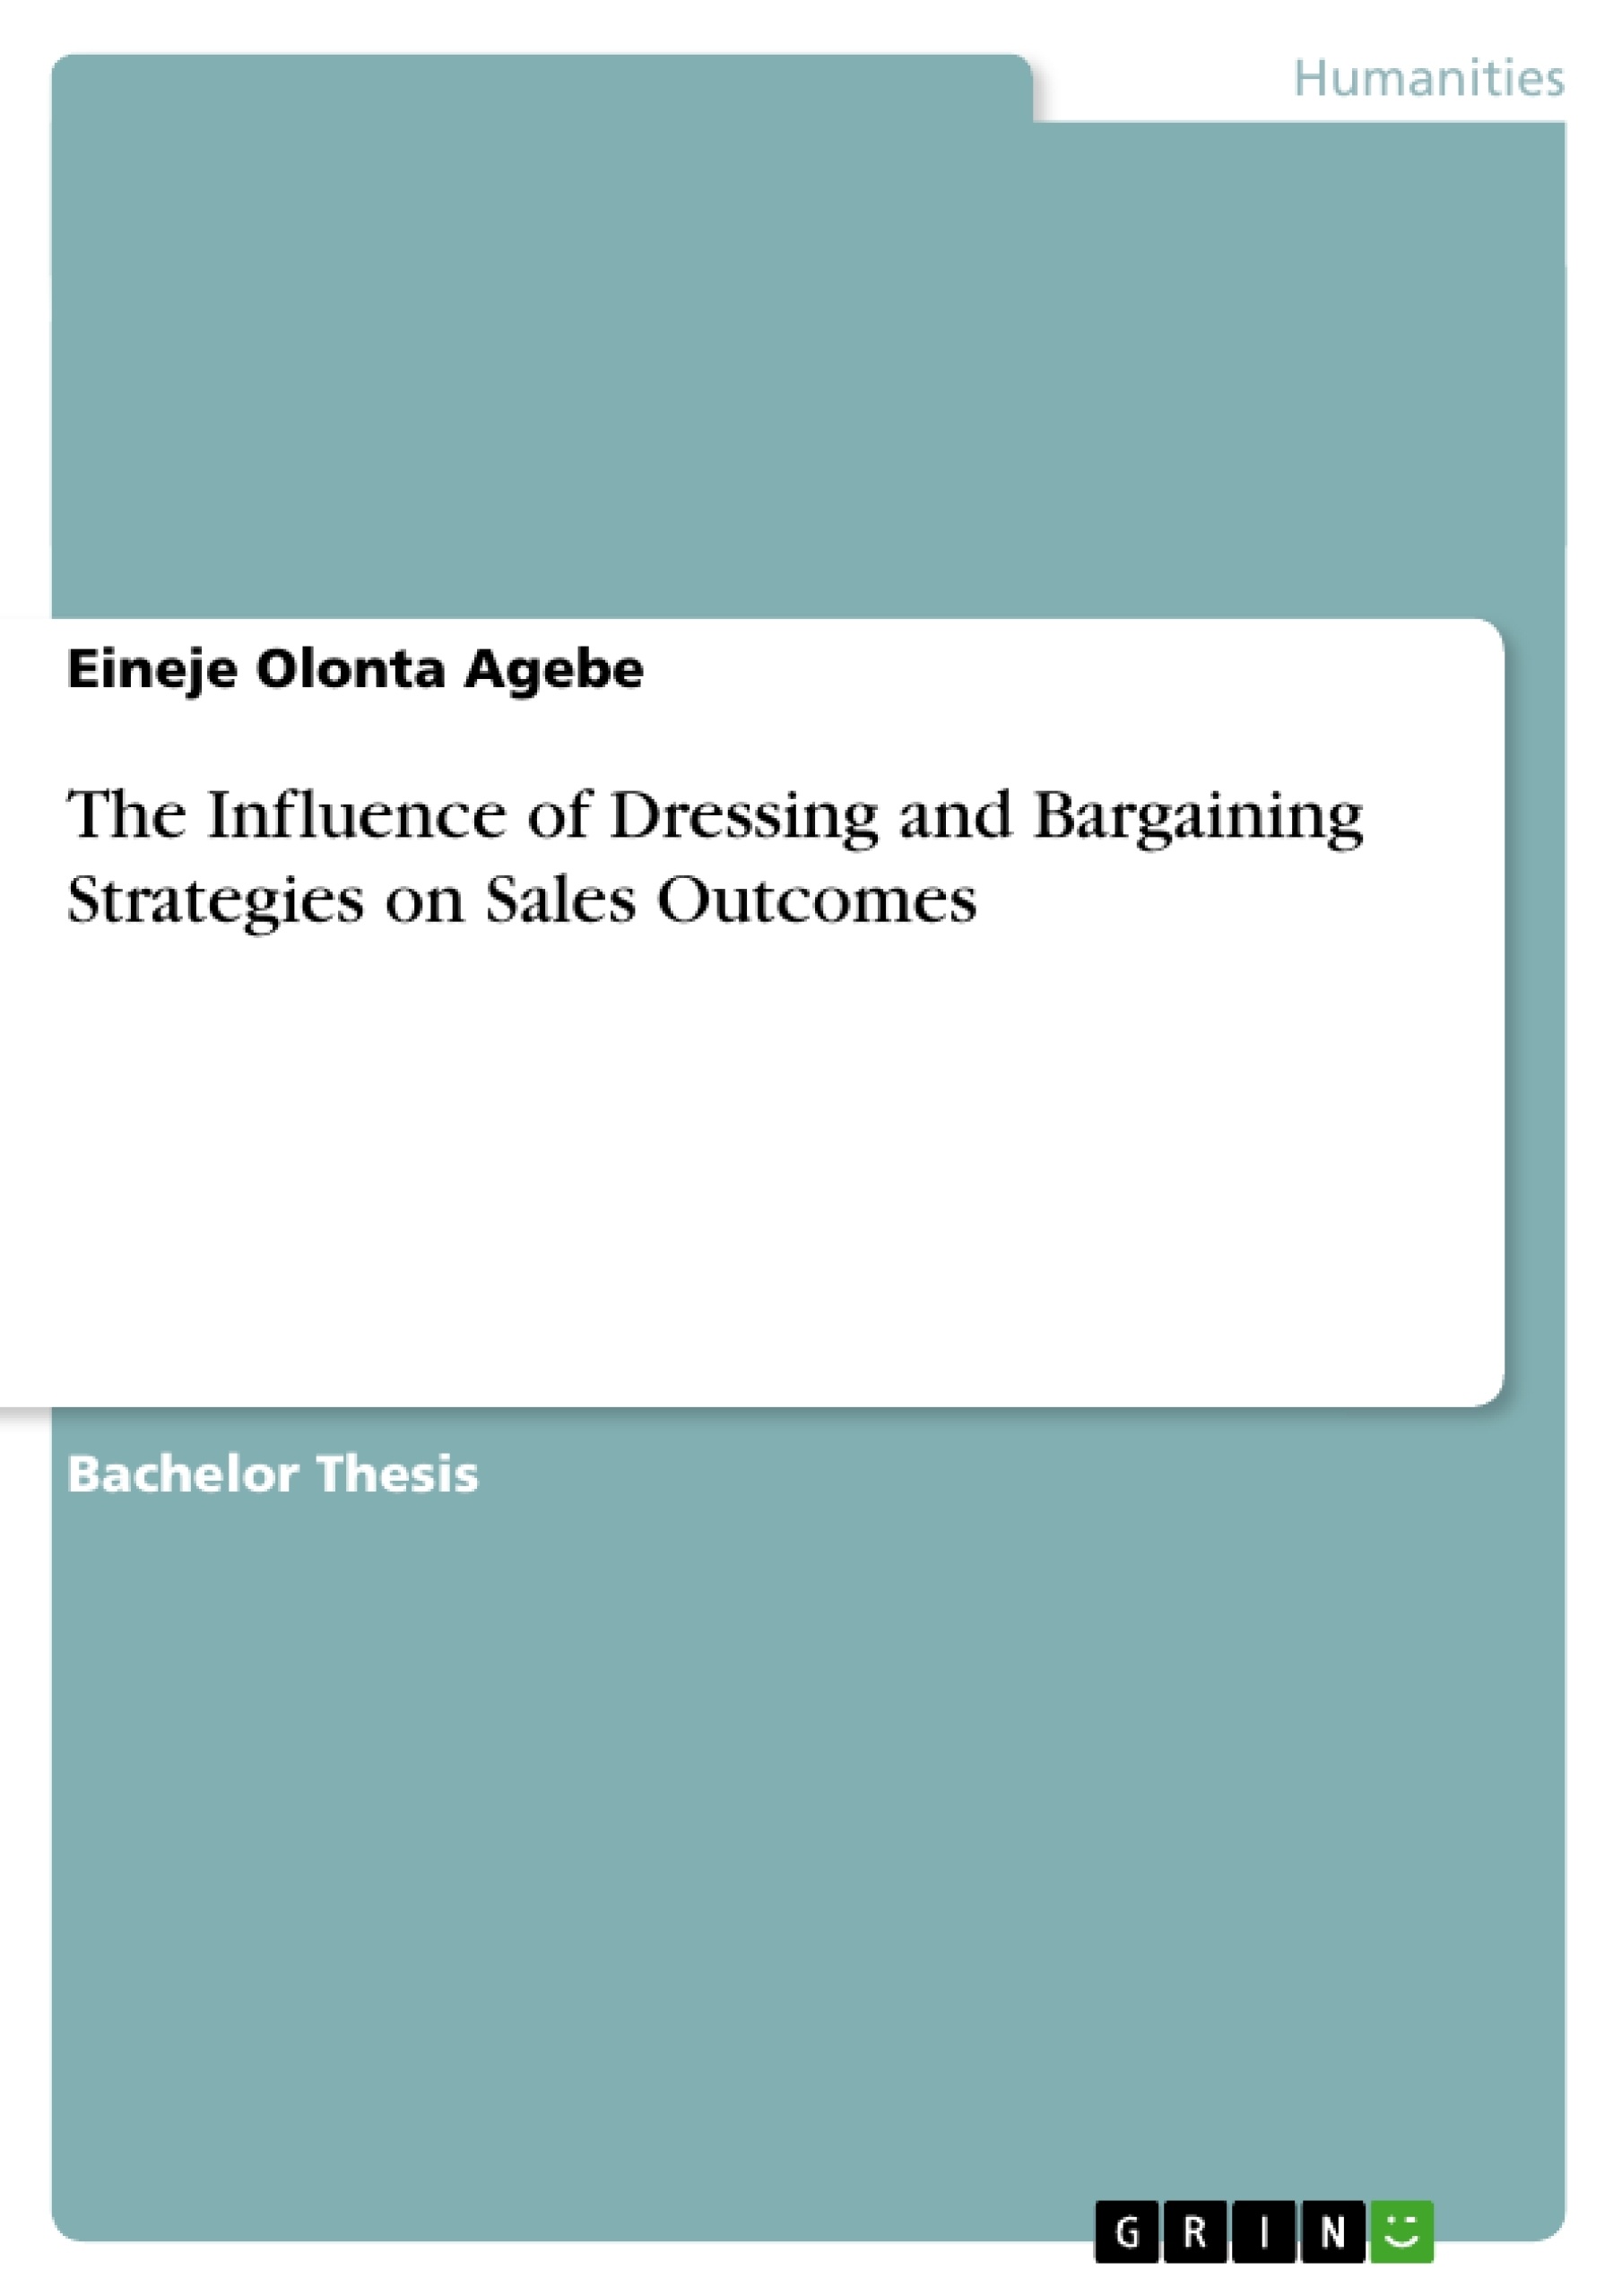 Titre: The Influence of Dressing and Bargaining Strategies on Sales Outcomes